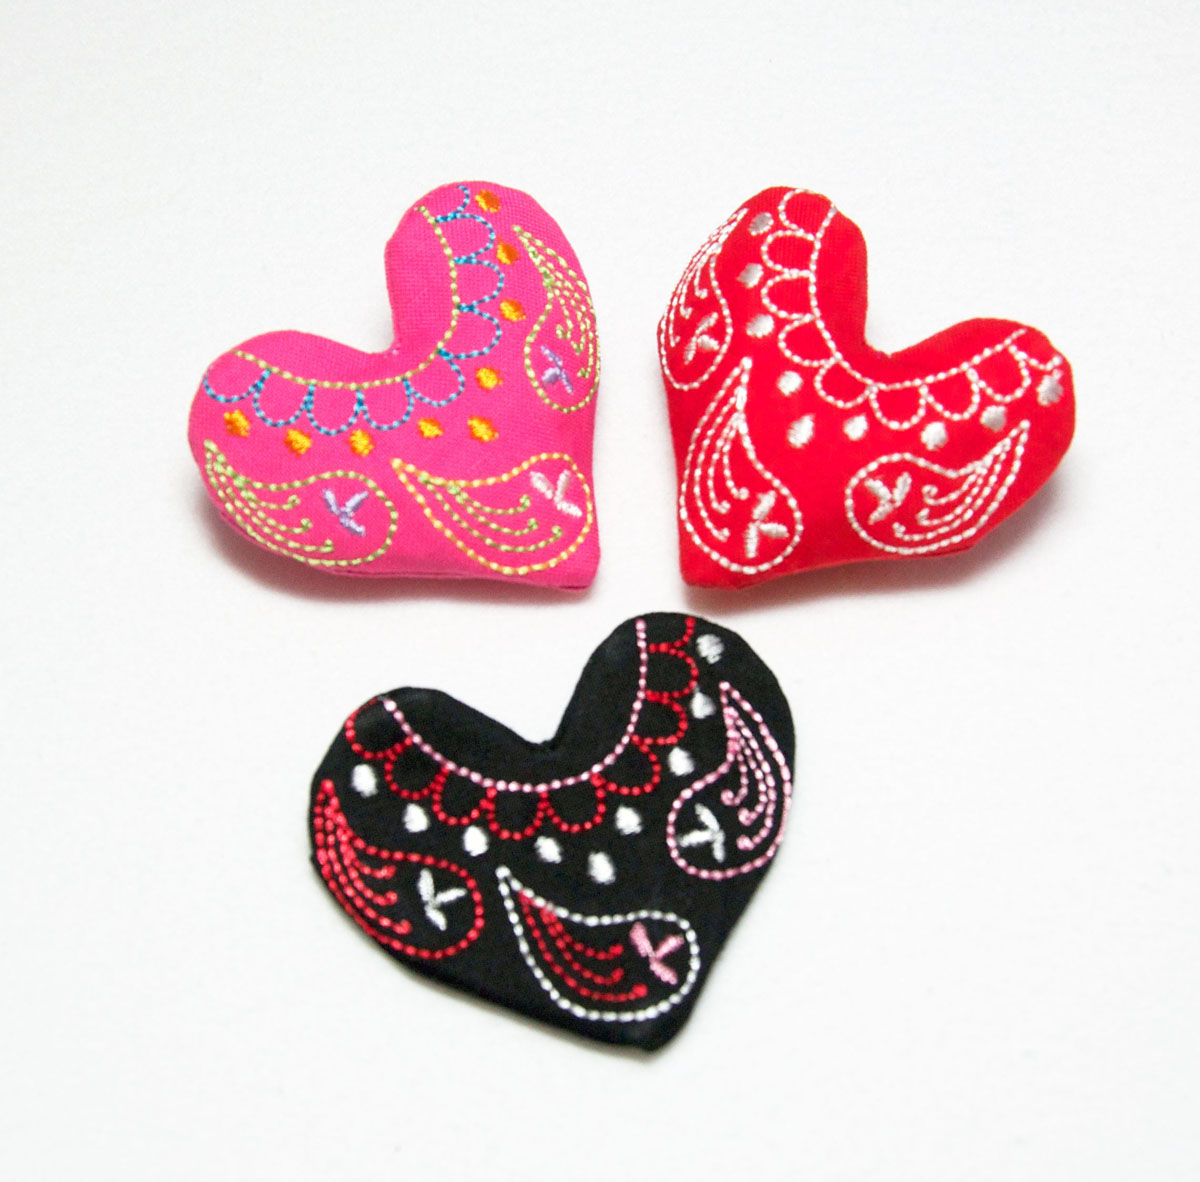 How To Make An Embroidery Pattern Embroidered Heart Pin And Free Embroidery Design Weallsew